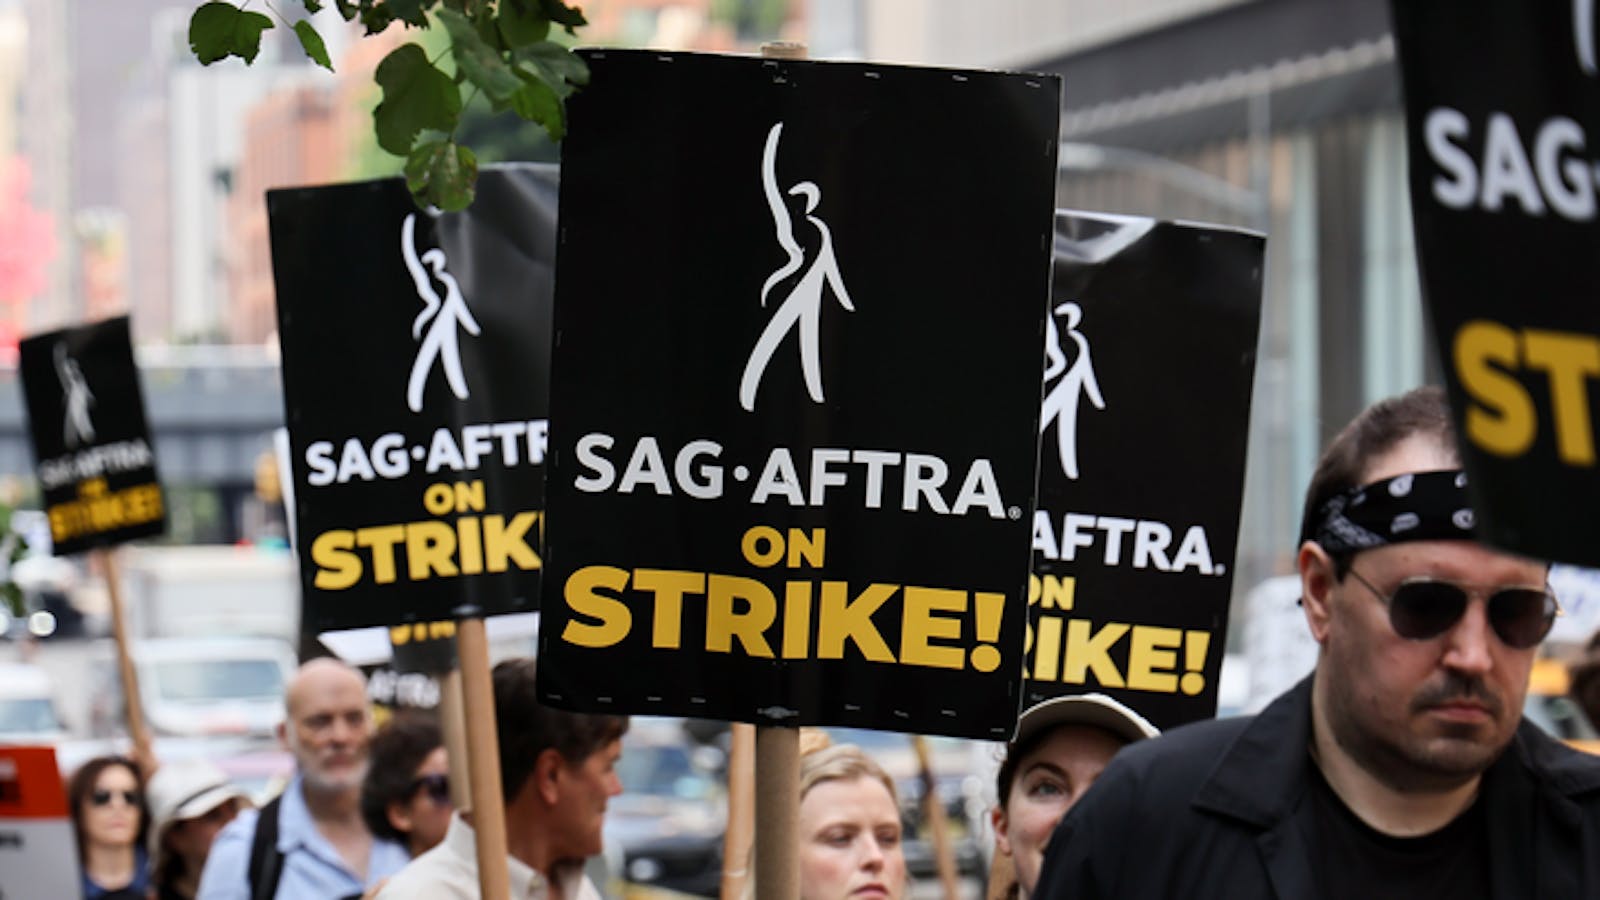 SAG-AFTRA members and supporters protest on July 18 in New York City. Photo by Getty.